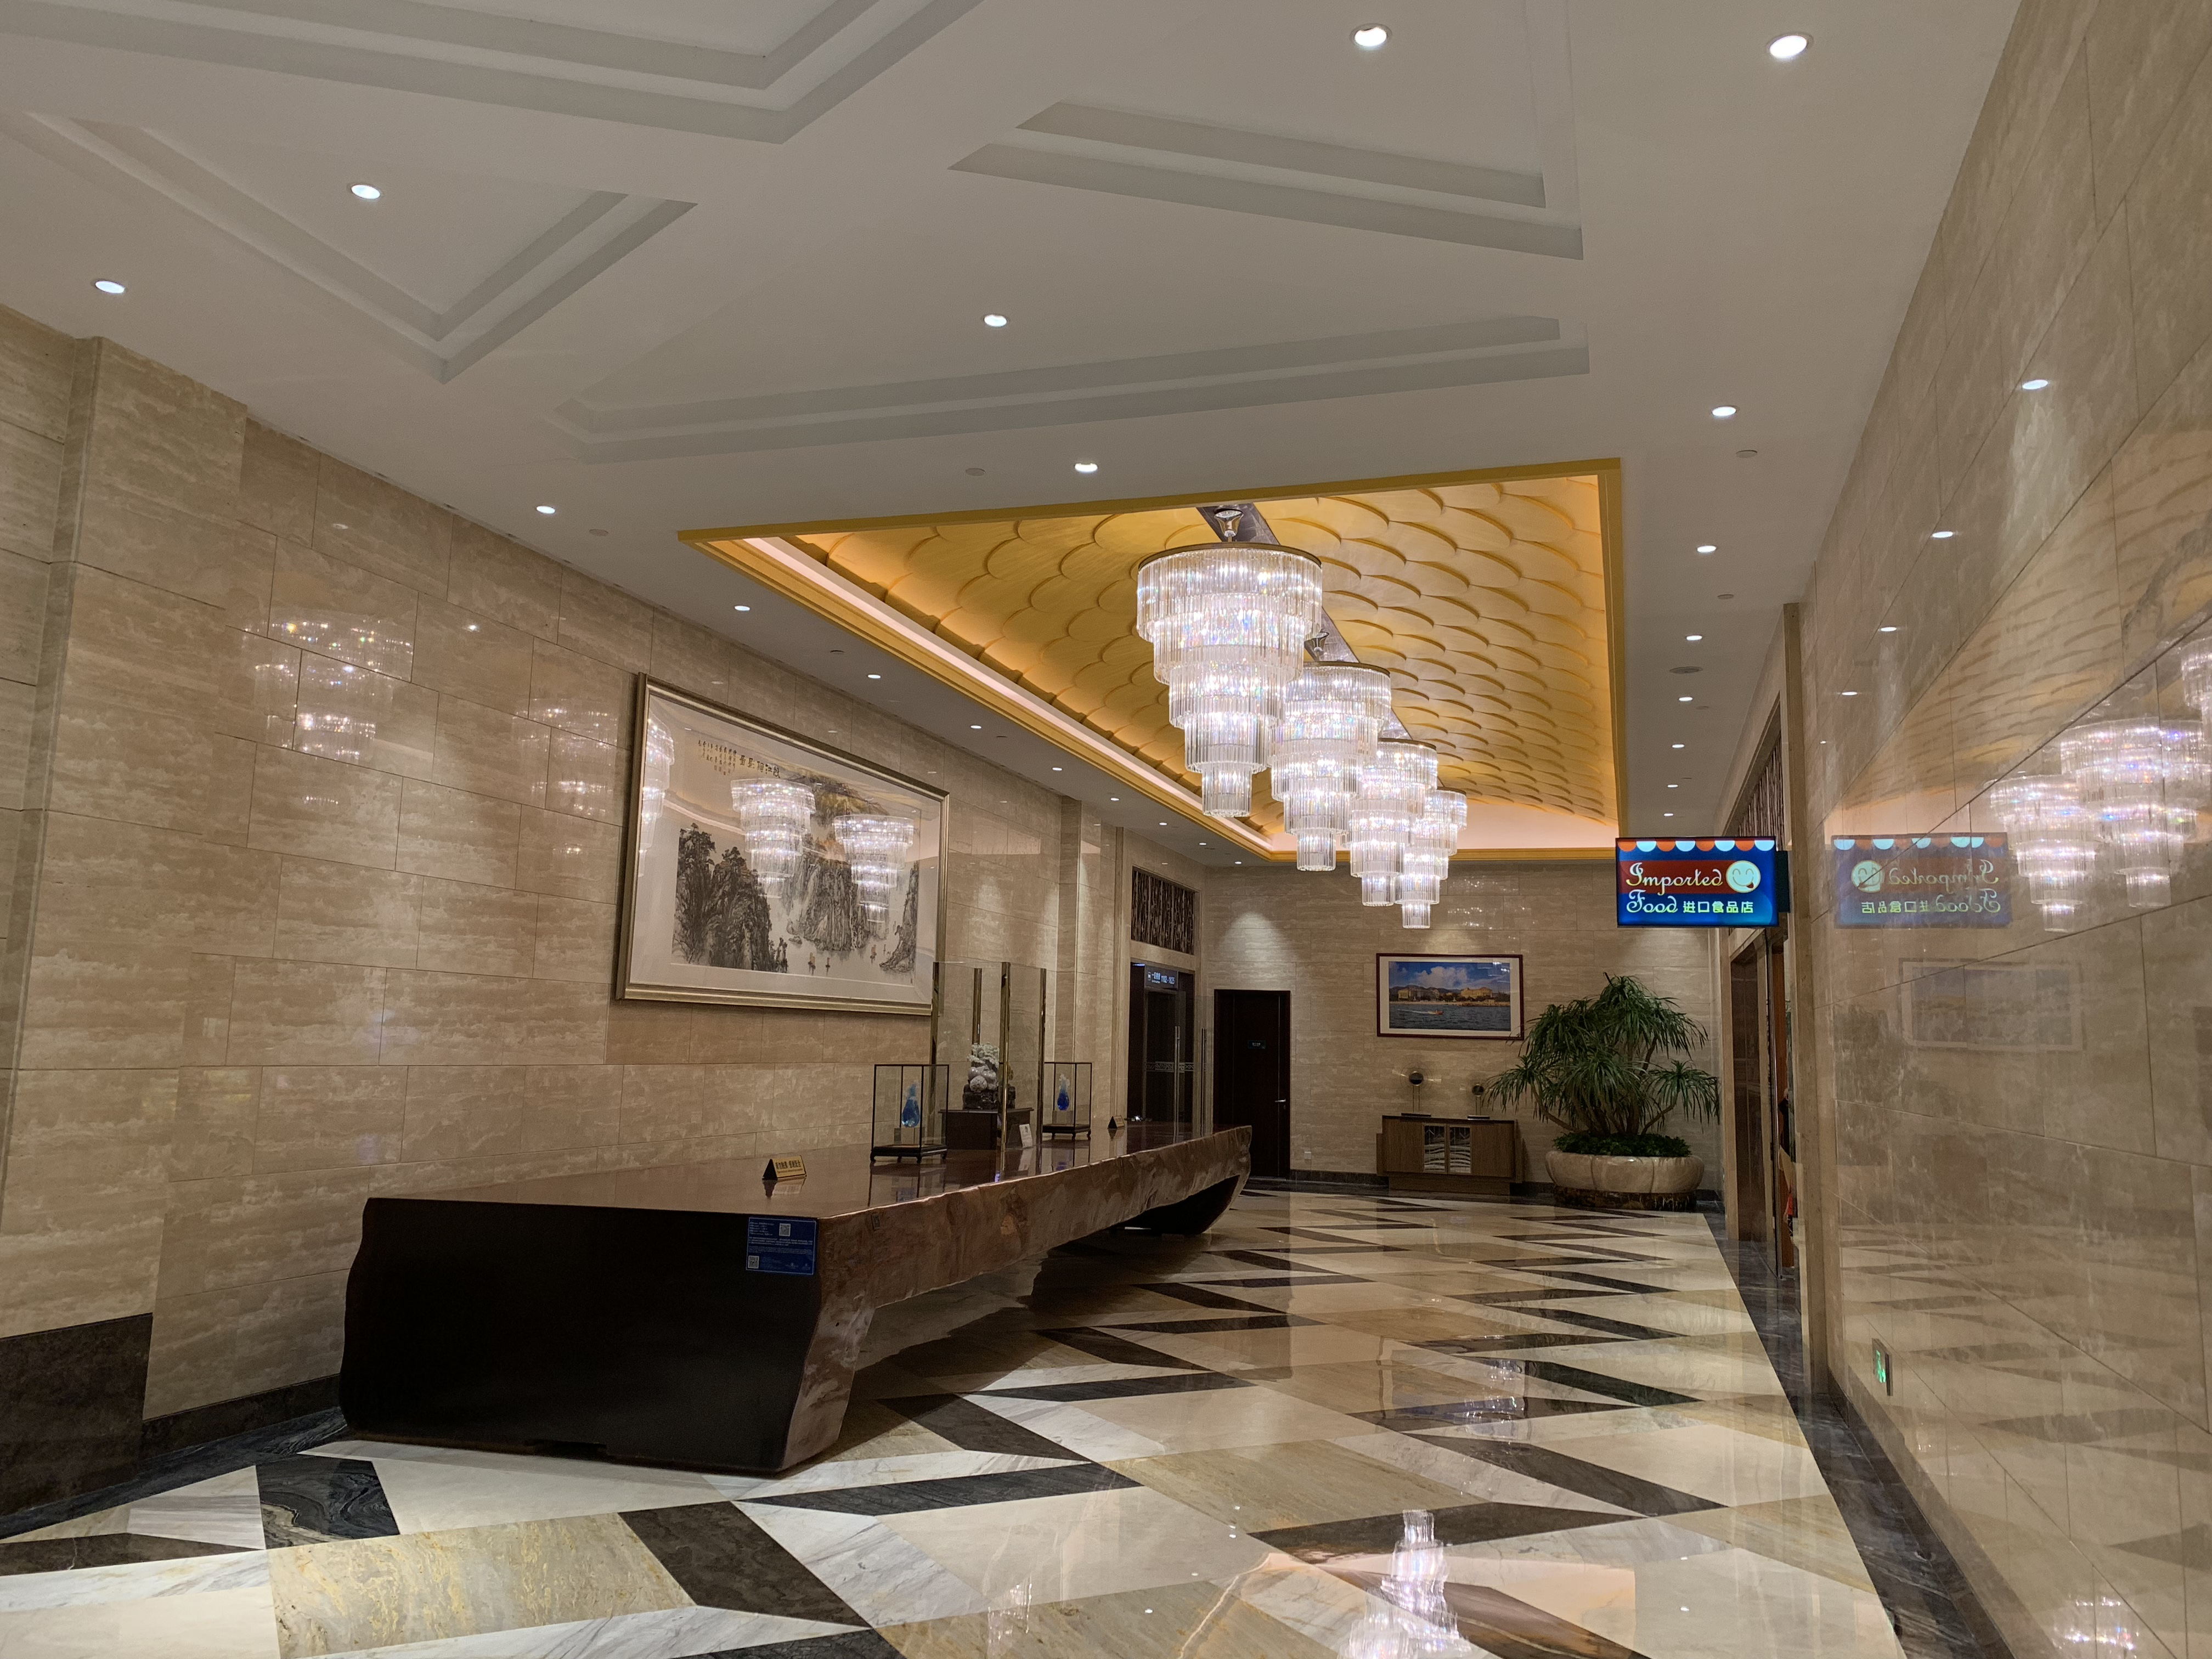 How to Arrange The CCT on Decorating The Lighting Environment in Luxury Hotel Lobby?